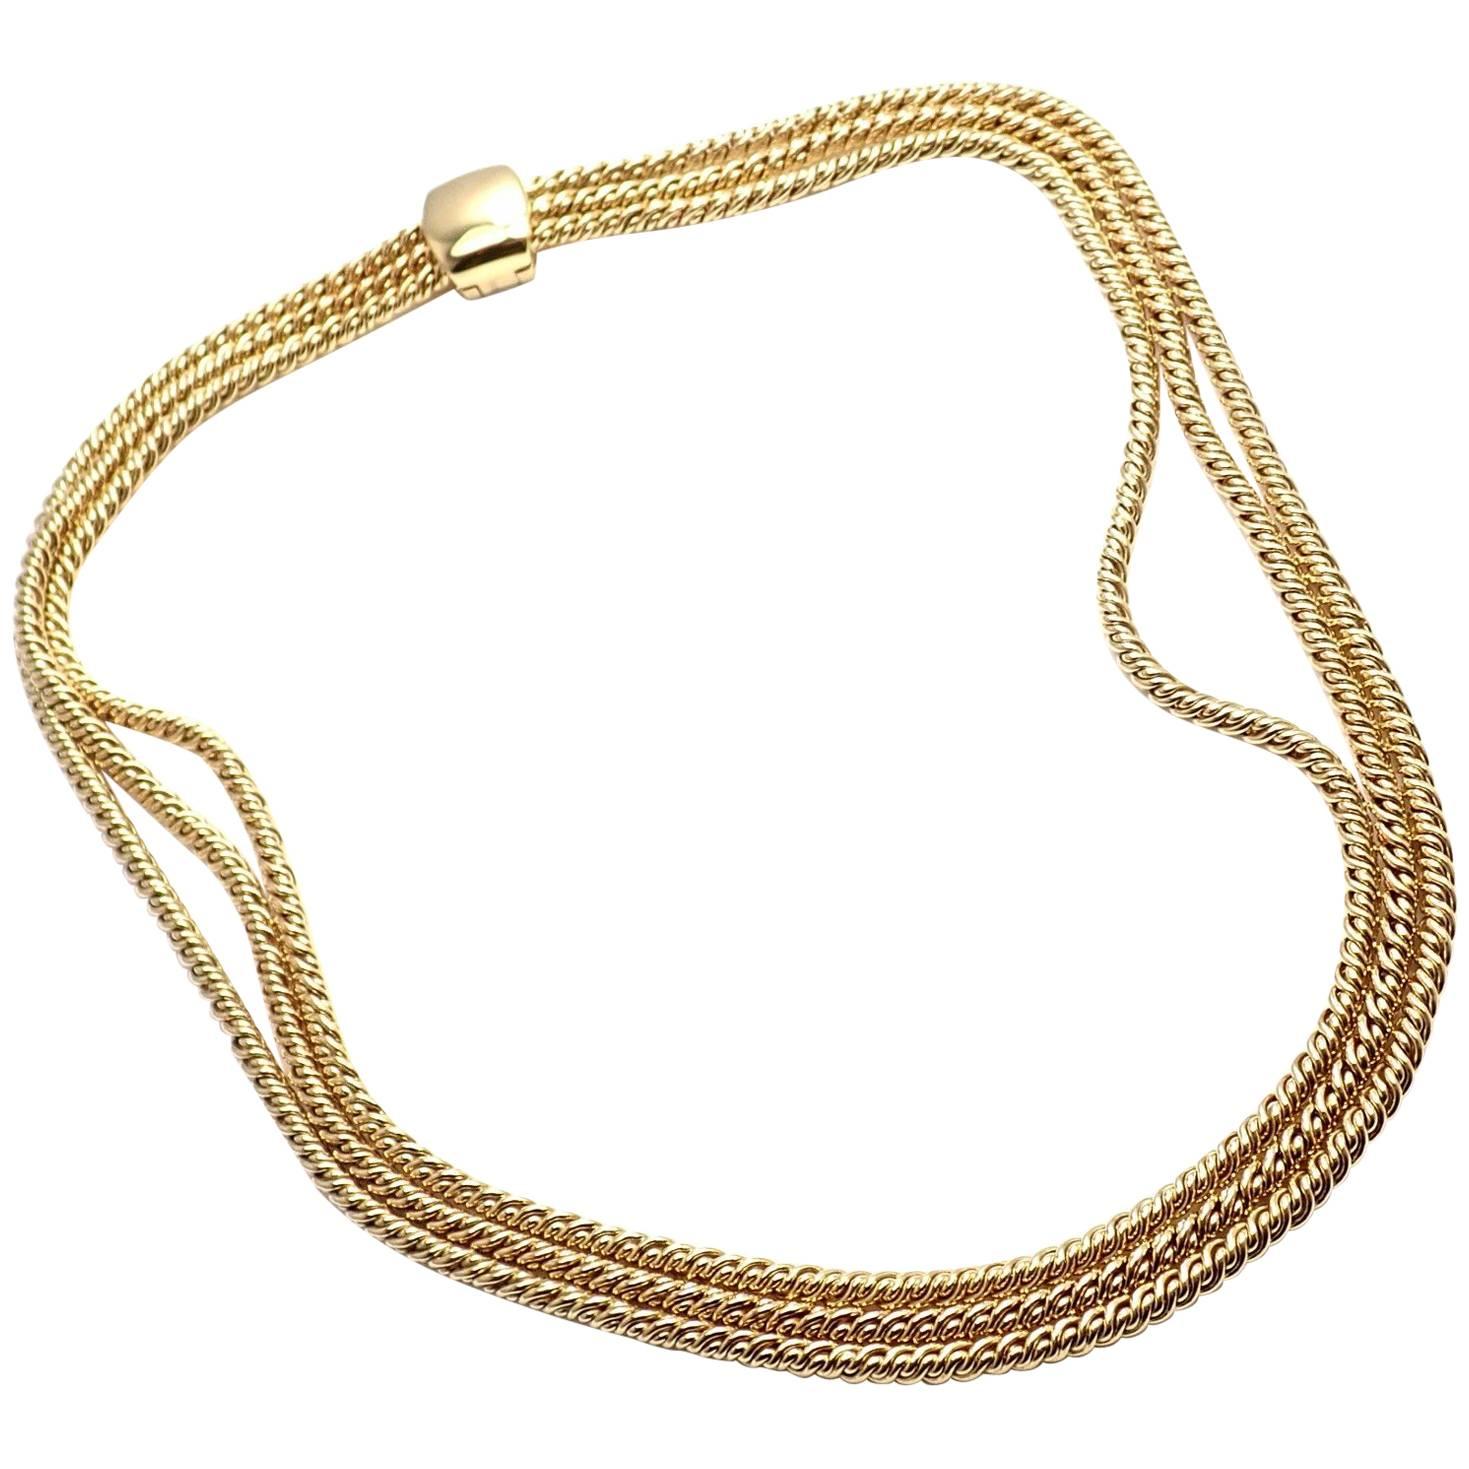 Pomellato Three Rows Twisted Yellow Gold Chain Necklace